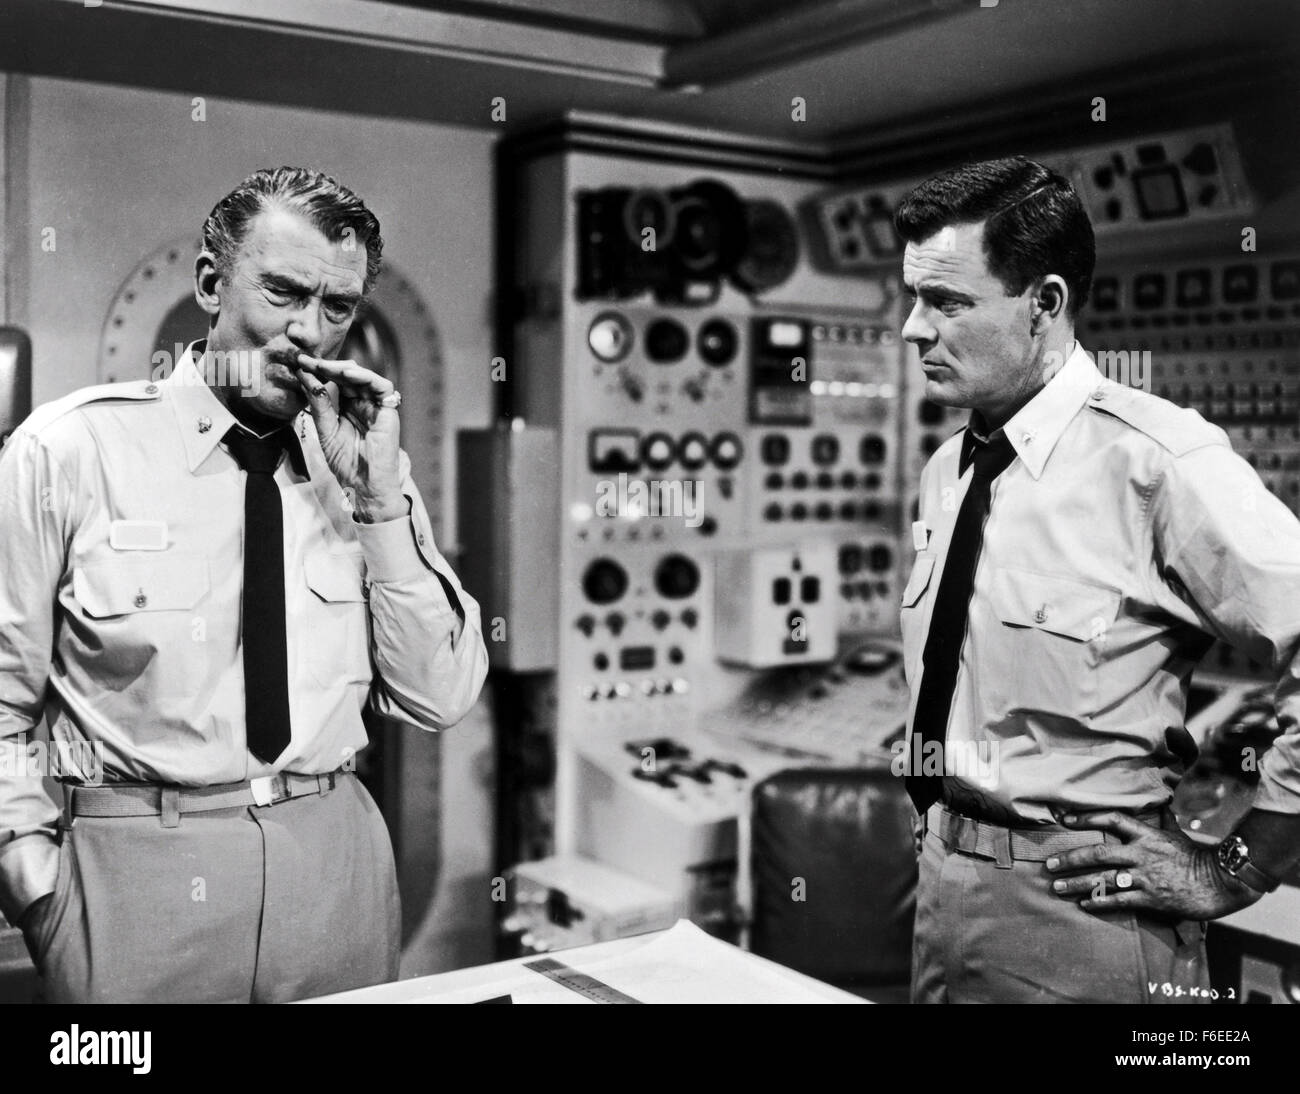 Jul 12 1961 Hollywood Ca Usa Walter Pidgeon Left As Admiral Harriman Nelson And Robert Sterling As Commander Lee Crane In The Sci Fi Adventure Film Voyage To The Bottom Of The Sea